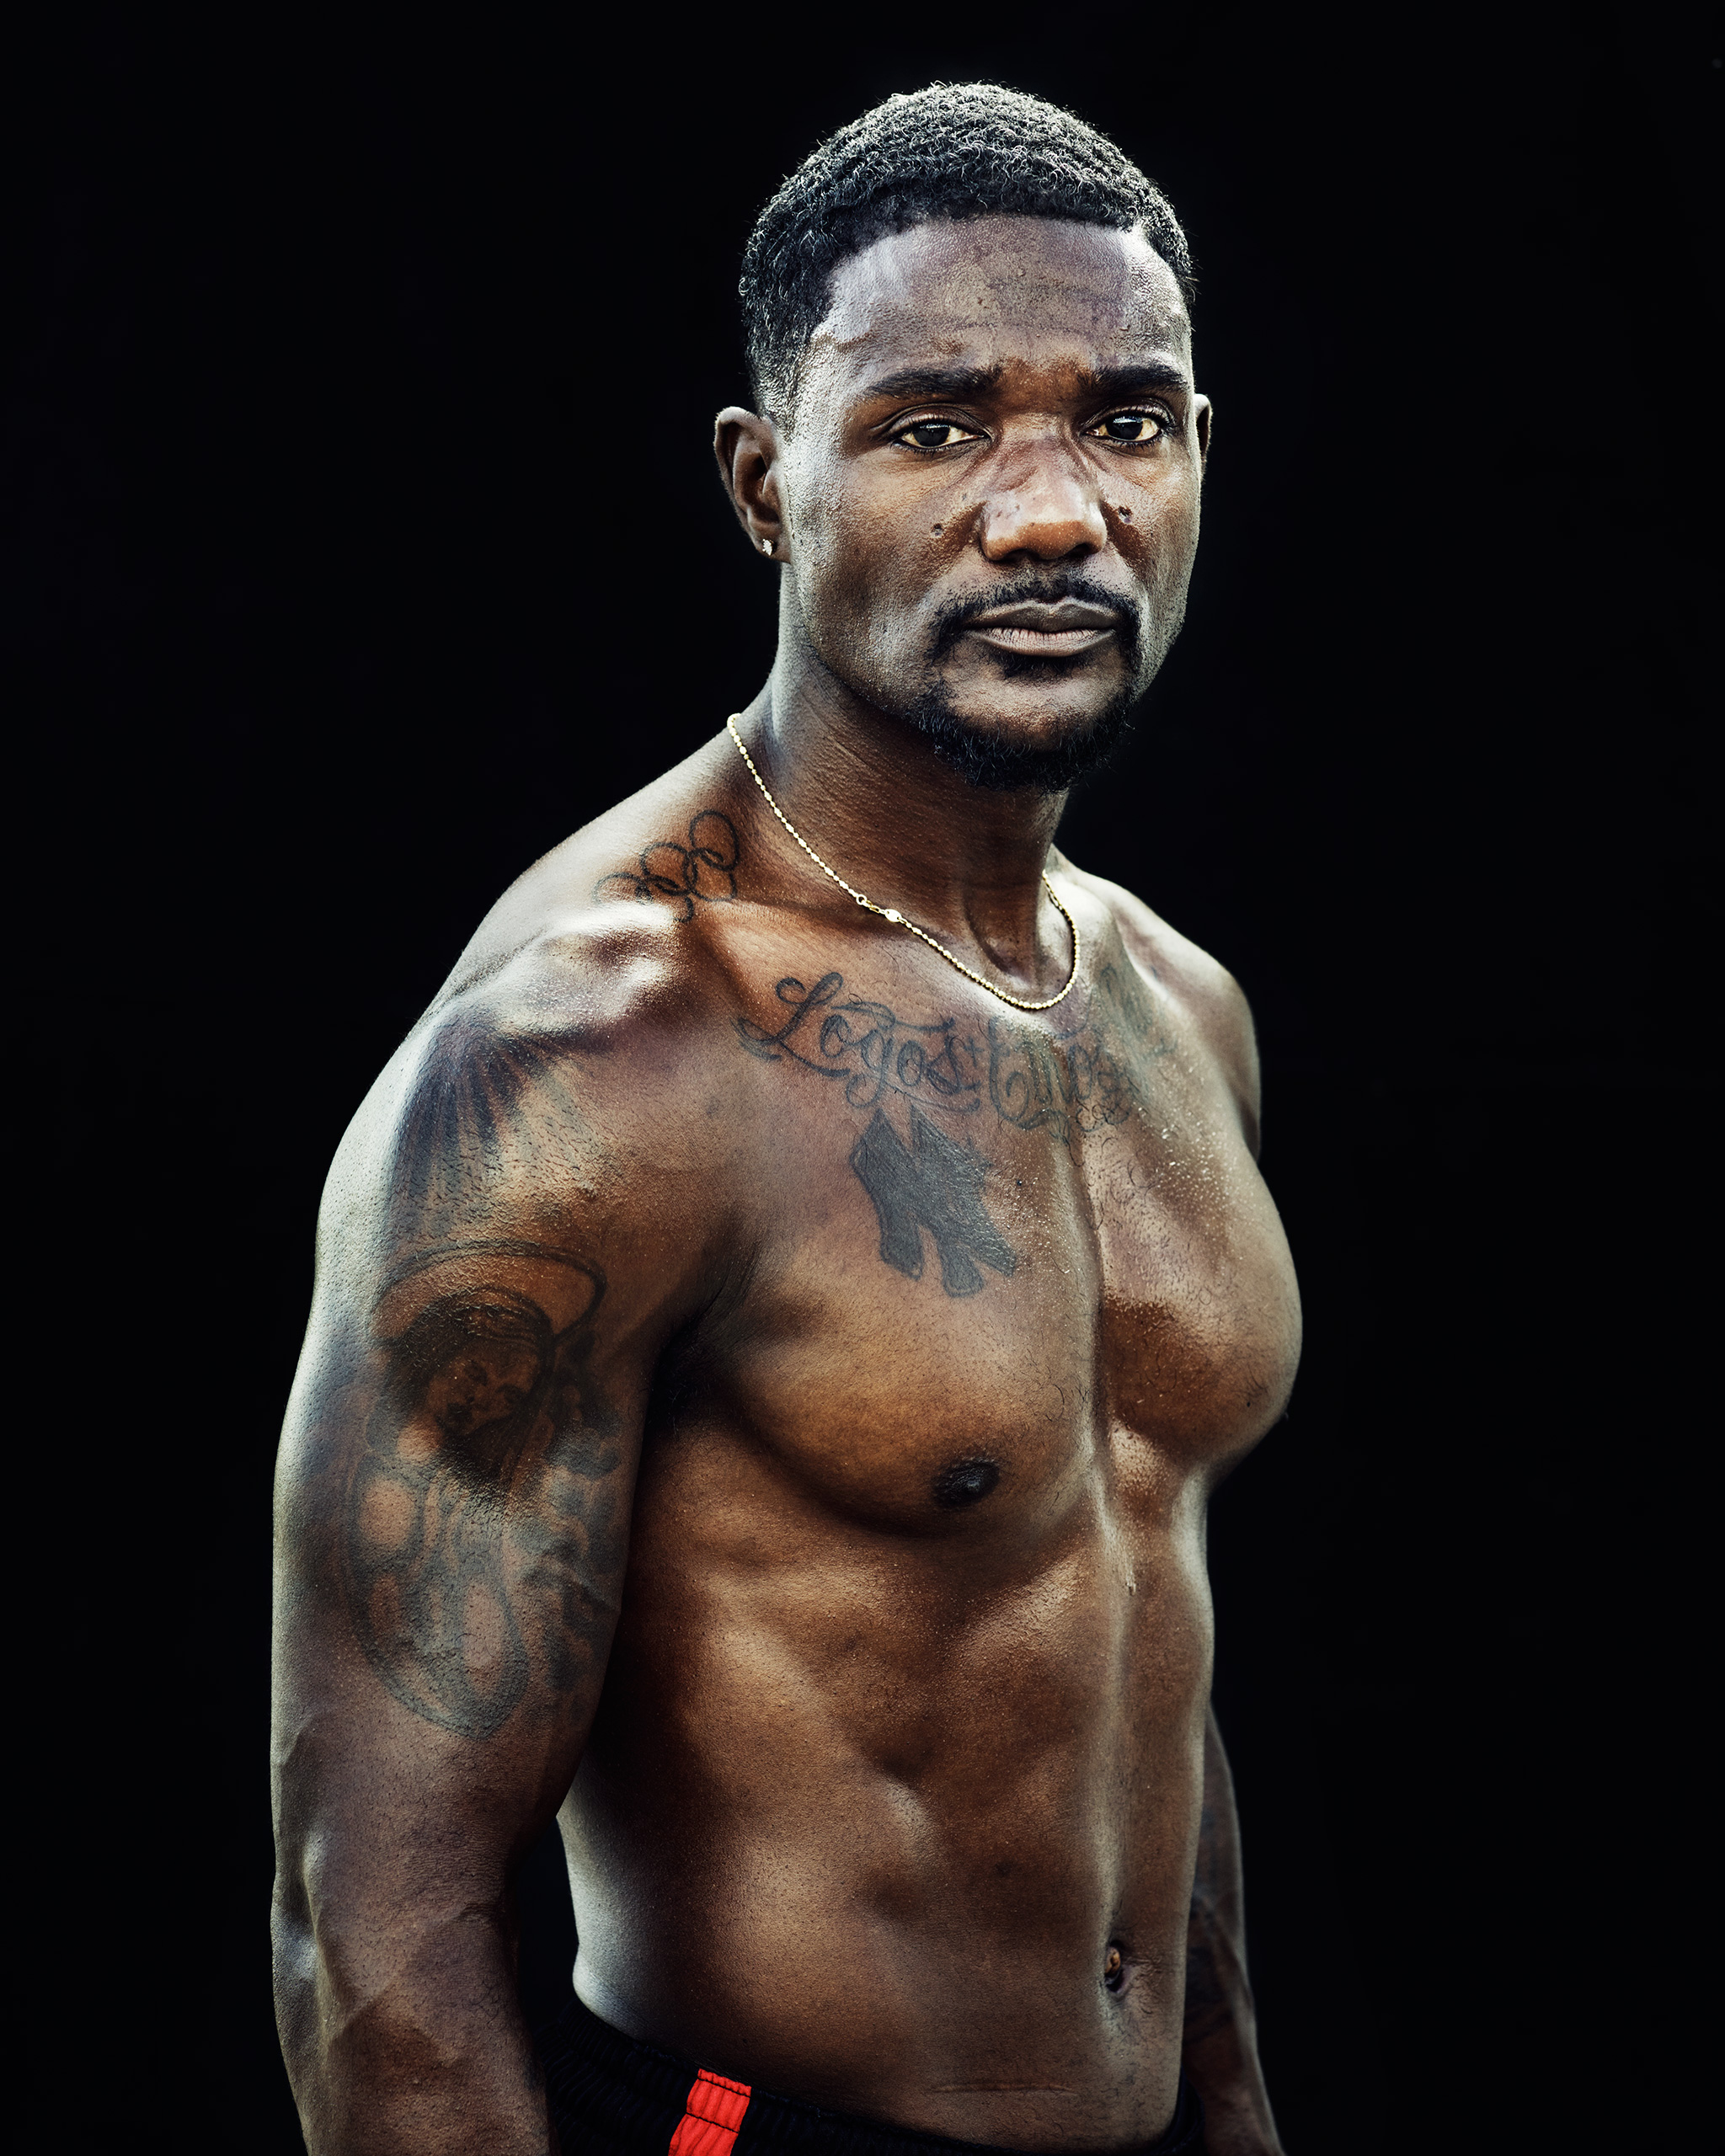 Gold Medalist sprinter Justin Gatlin photographed at Montverde Academy in Montverde, Fla., July 22, 2016.From TIME's Summer Olympics special. Aug. 8, 2016 issue.